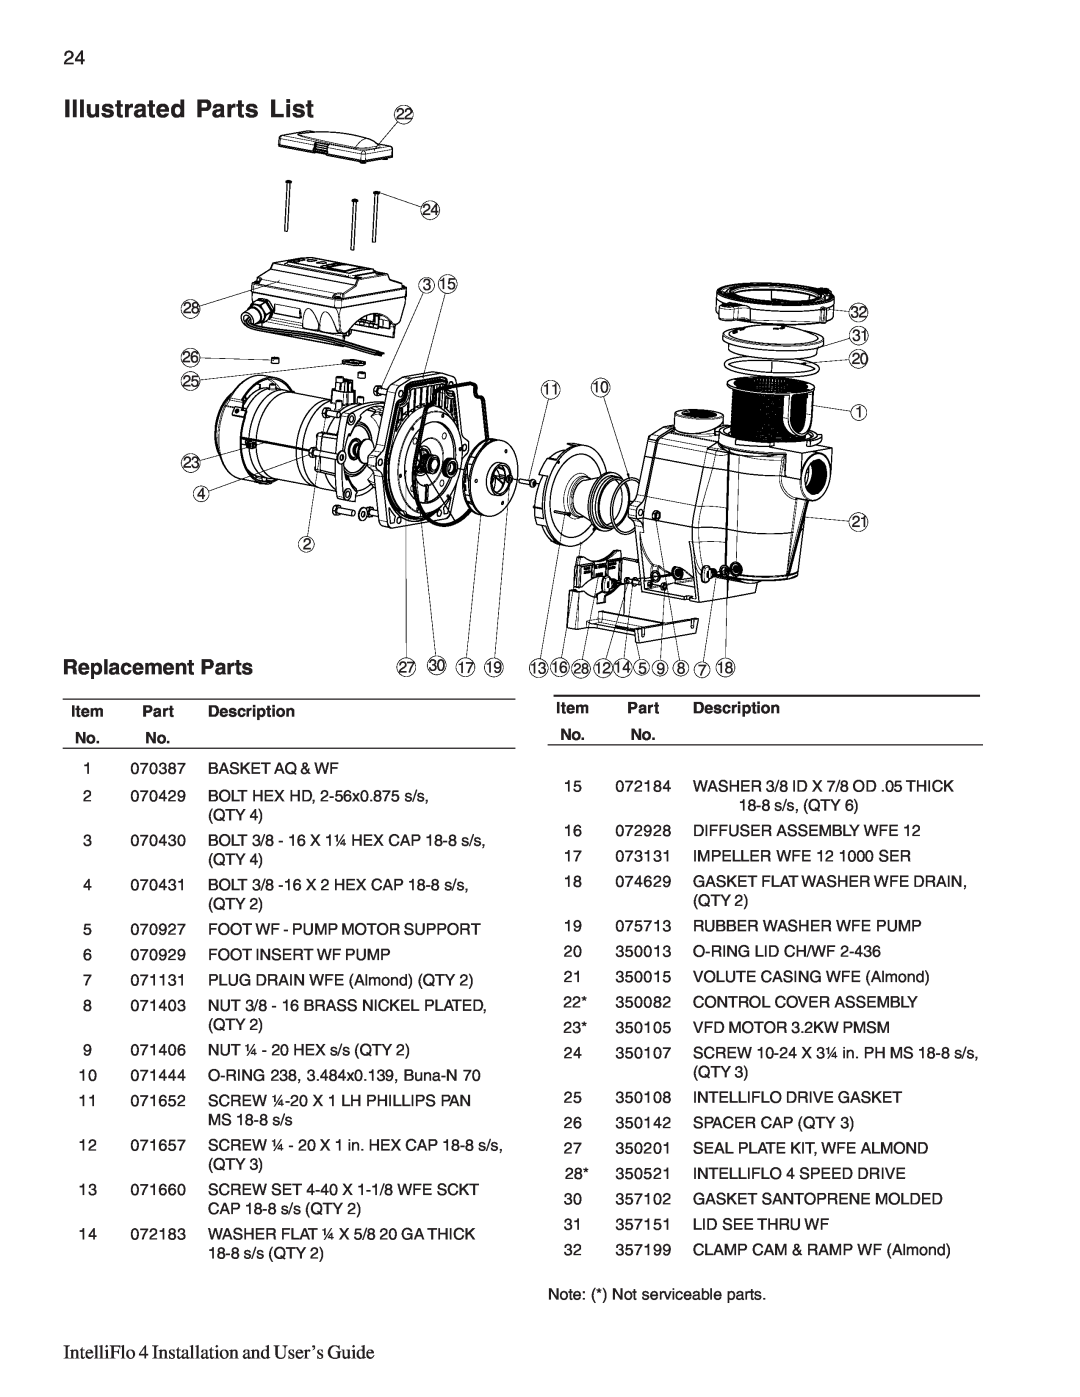 Pentair 4/160, 4/100 Illustrated Parts List, Replacement Parts, IntelliFlo 4 Installation and User’s Guide 